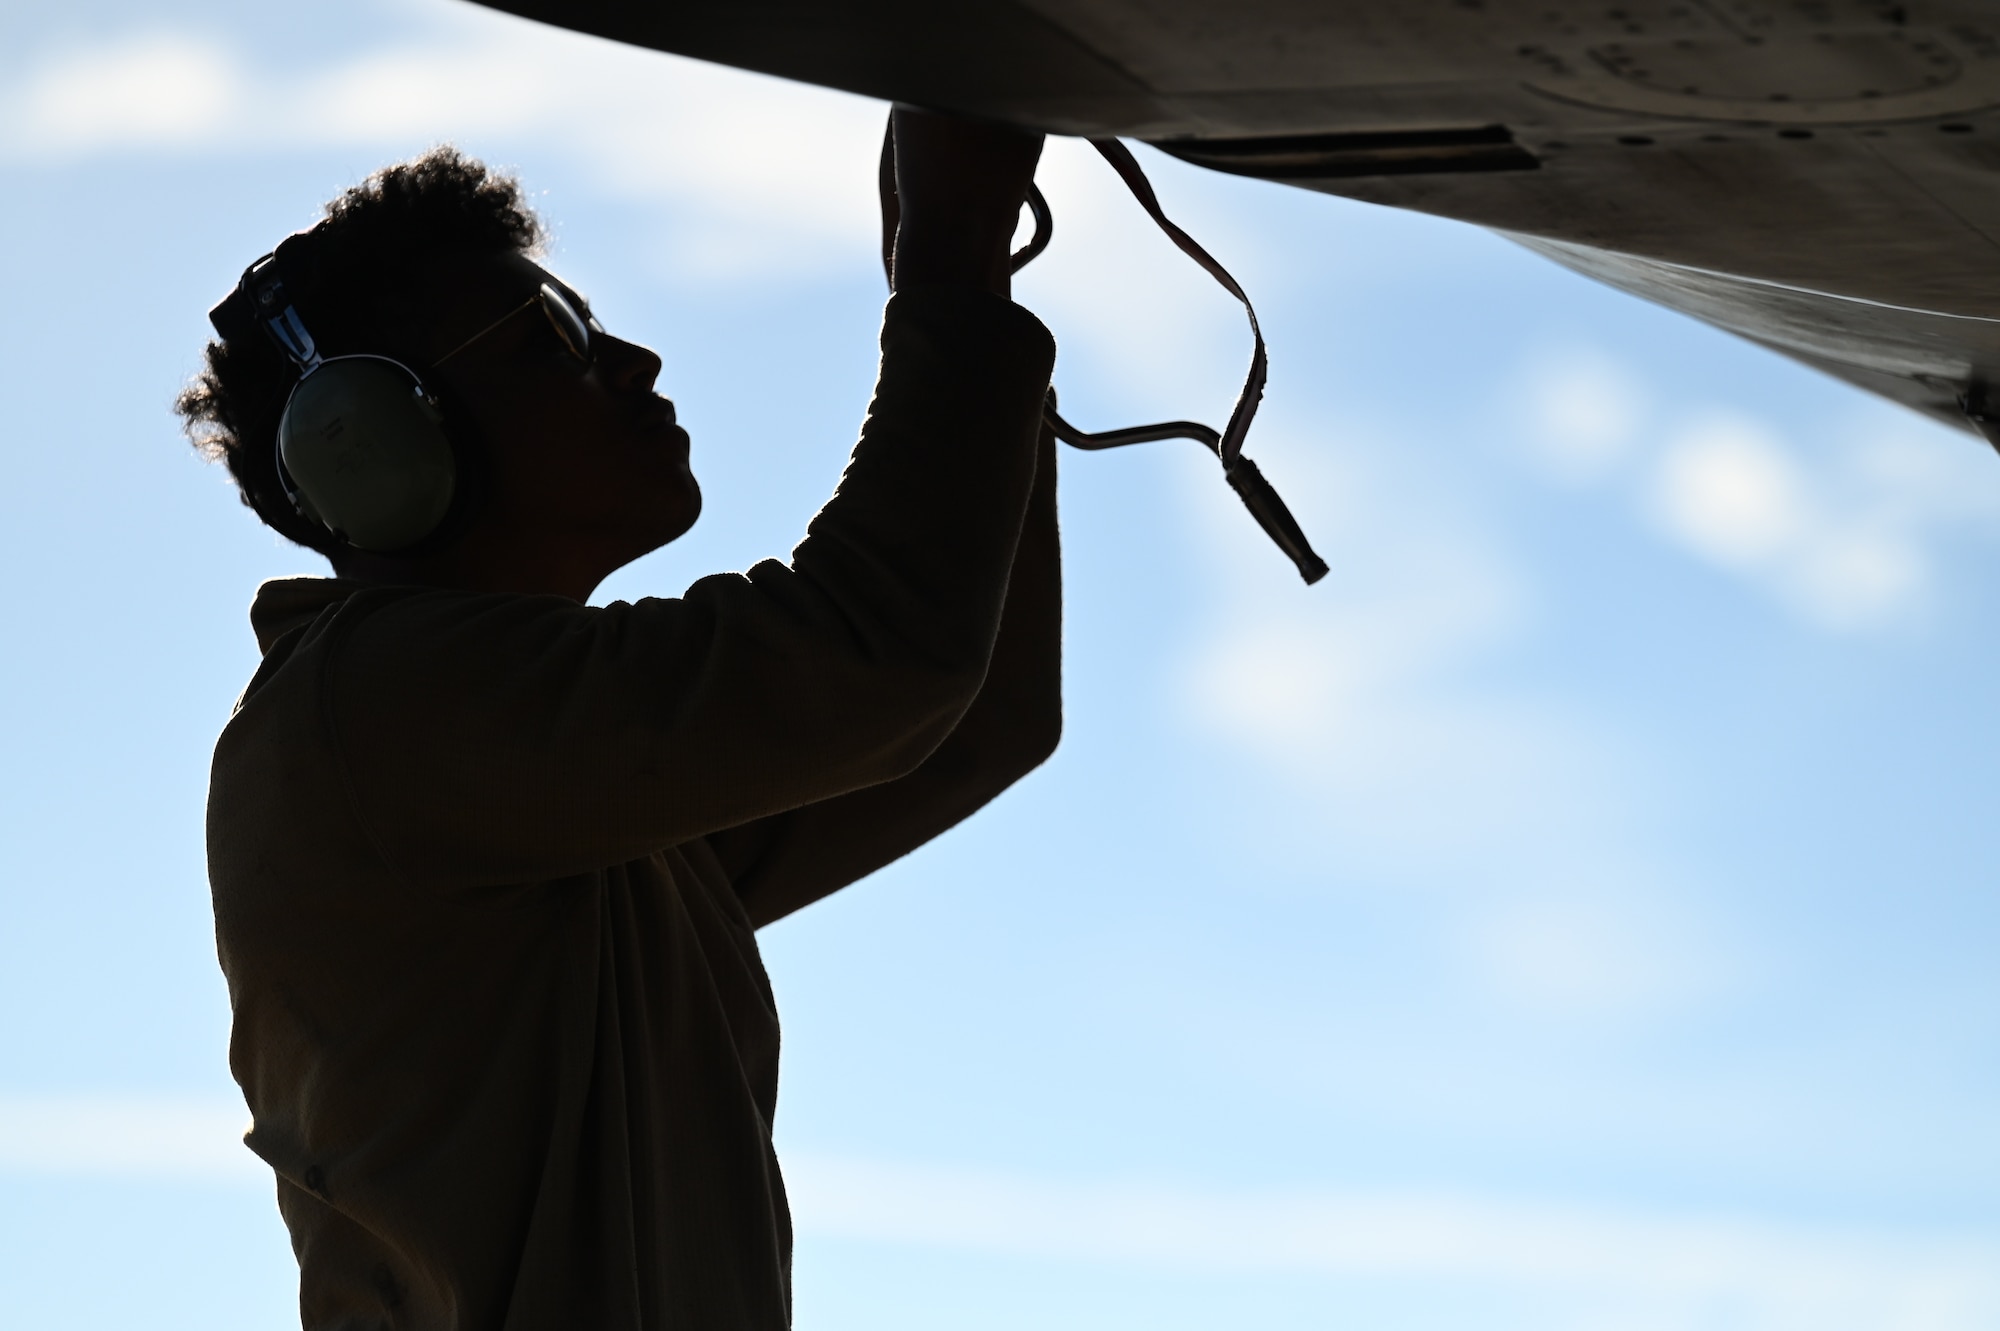 An Airman from the 28th Maintenance Group, Ellsworth Air Force Base, South Dakota, performs preflight maintenance on a B-1B Lancer on the flightline at Dyess AFB, Texas, Feb. 1, 2024. Ellsworth Air Force Base B-1Bs recently launched from Dyess Air Force Base to support U.S. Central Command priorities, validating the United States Air Force capability to provide precision, long-range strike anytime, anywhere. (U.S. Air Force photo by Staff Sgt. Holly Cook)